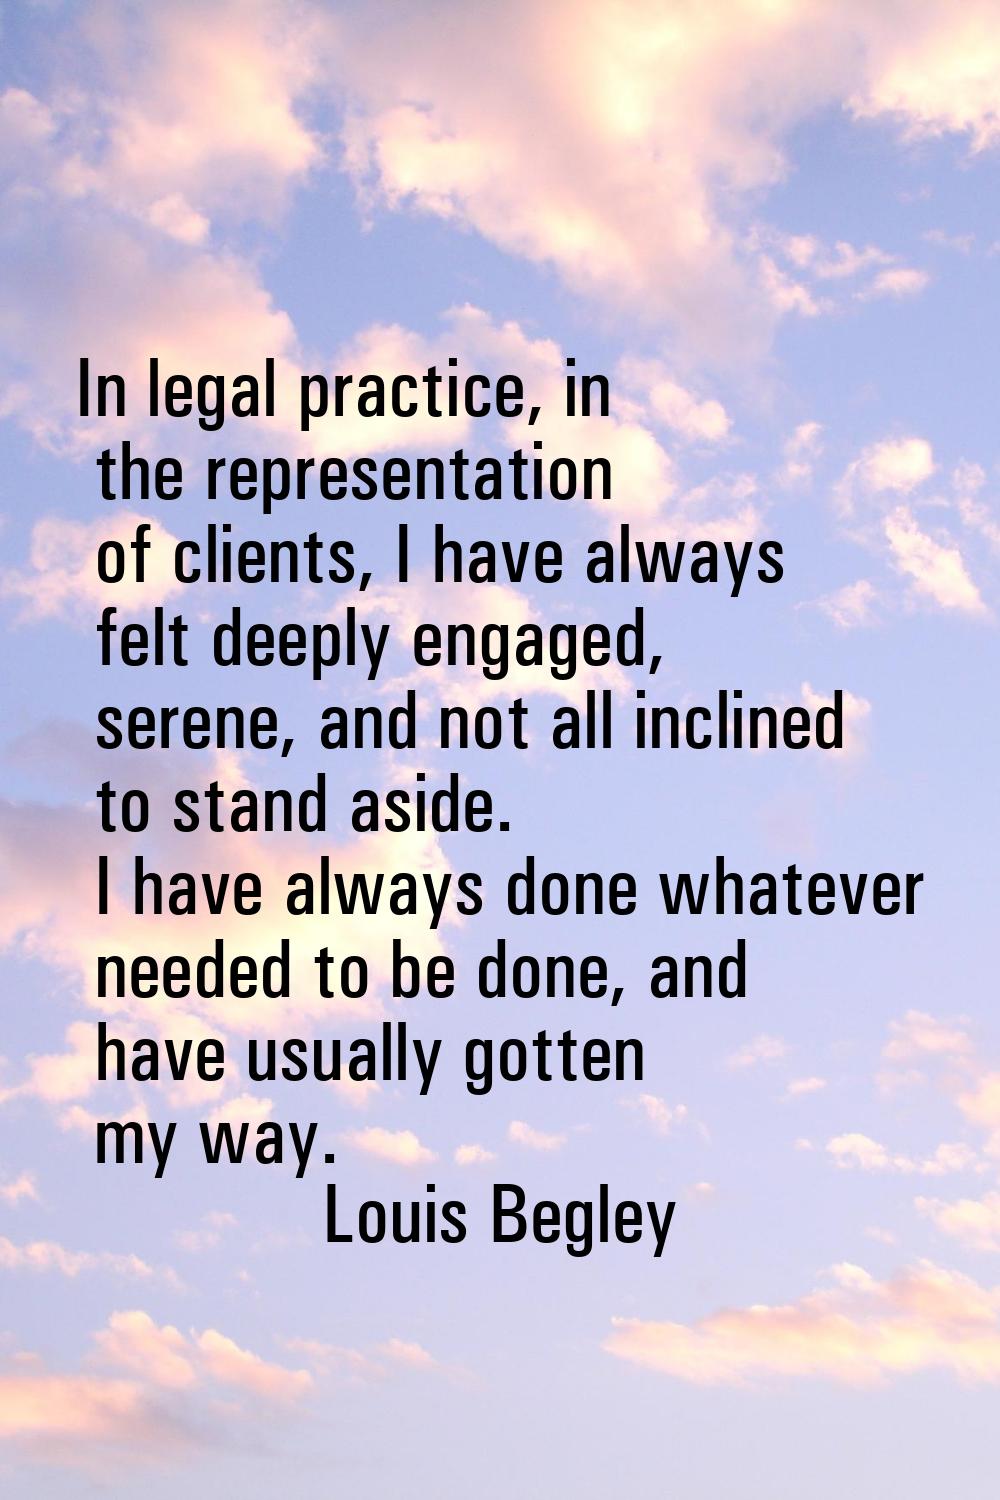 In legal practice, in the representation of clients, I have always felt deeply engaged, serene, and